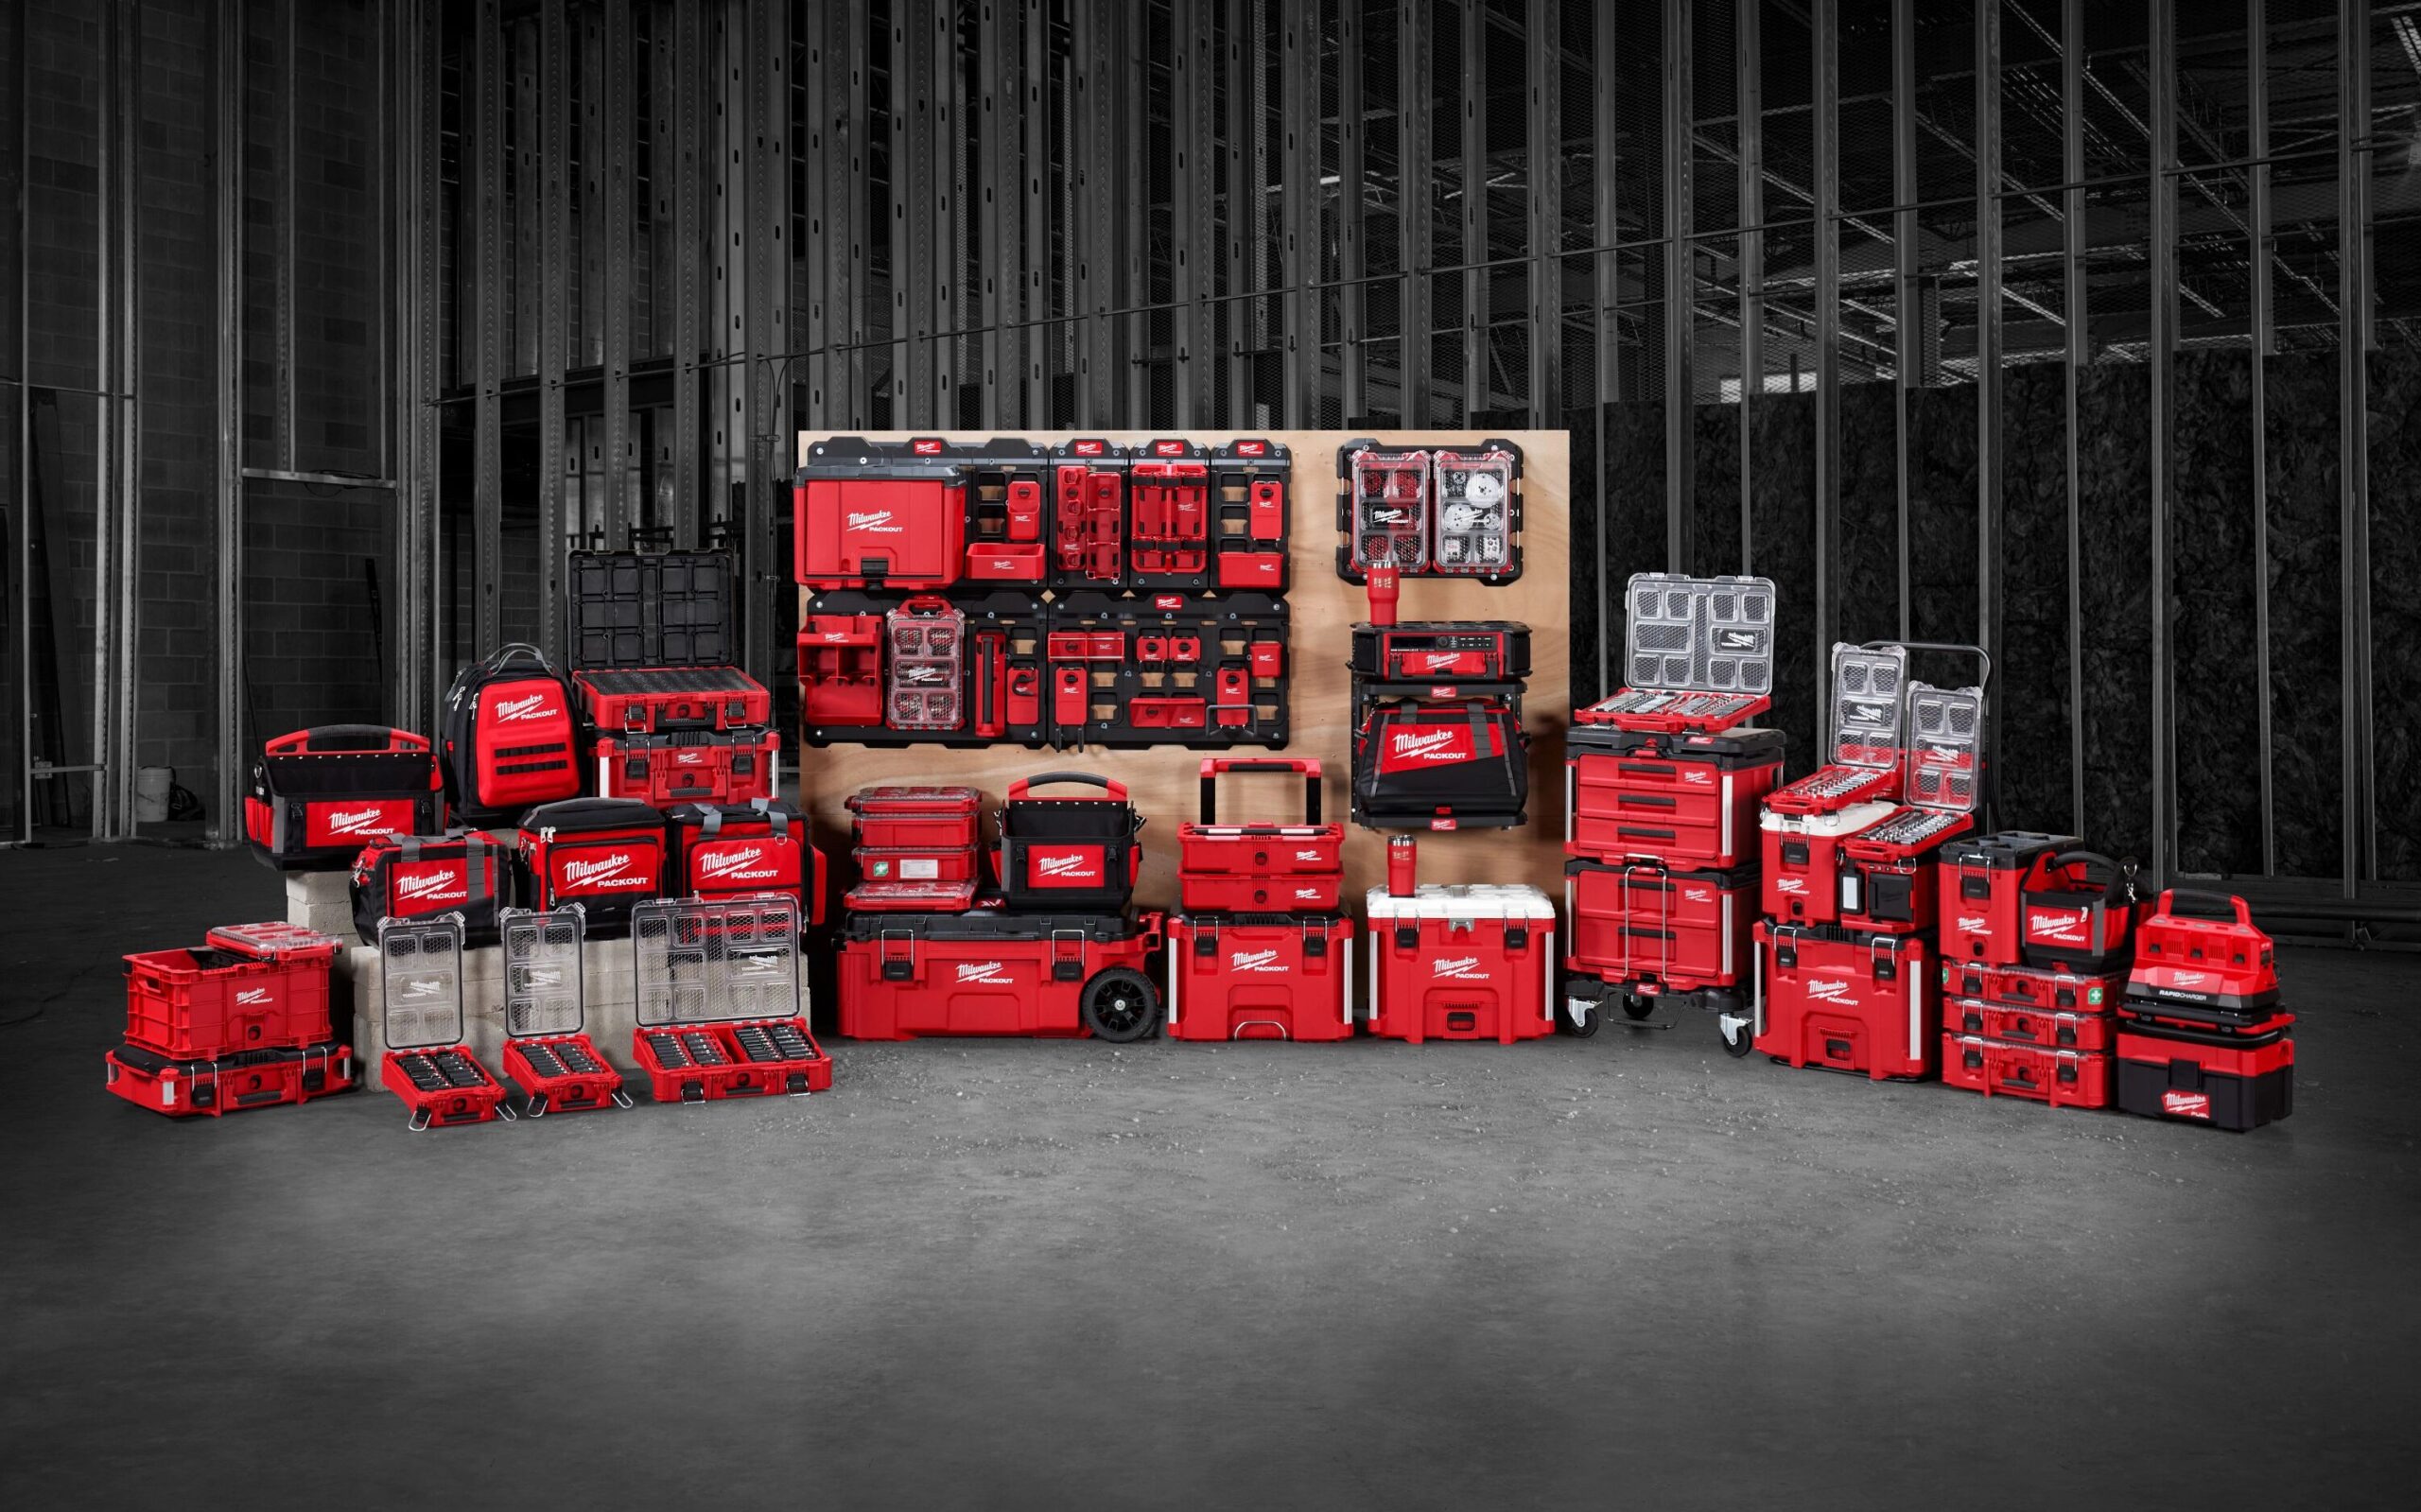 Milwaukee Tool releases Packout two- and three-door tool boxes